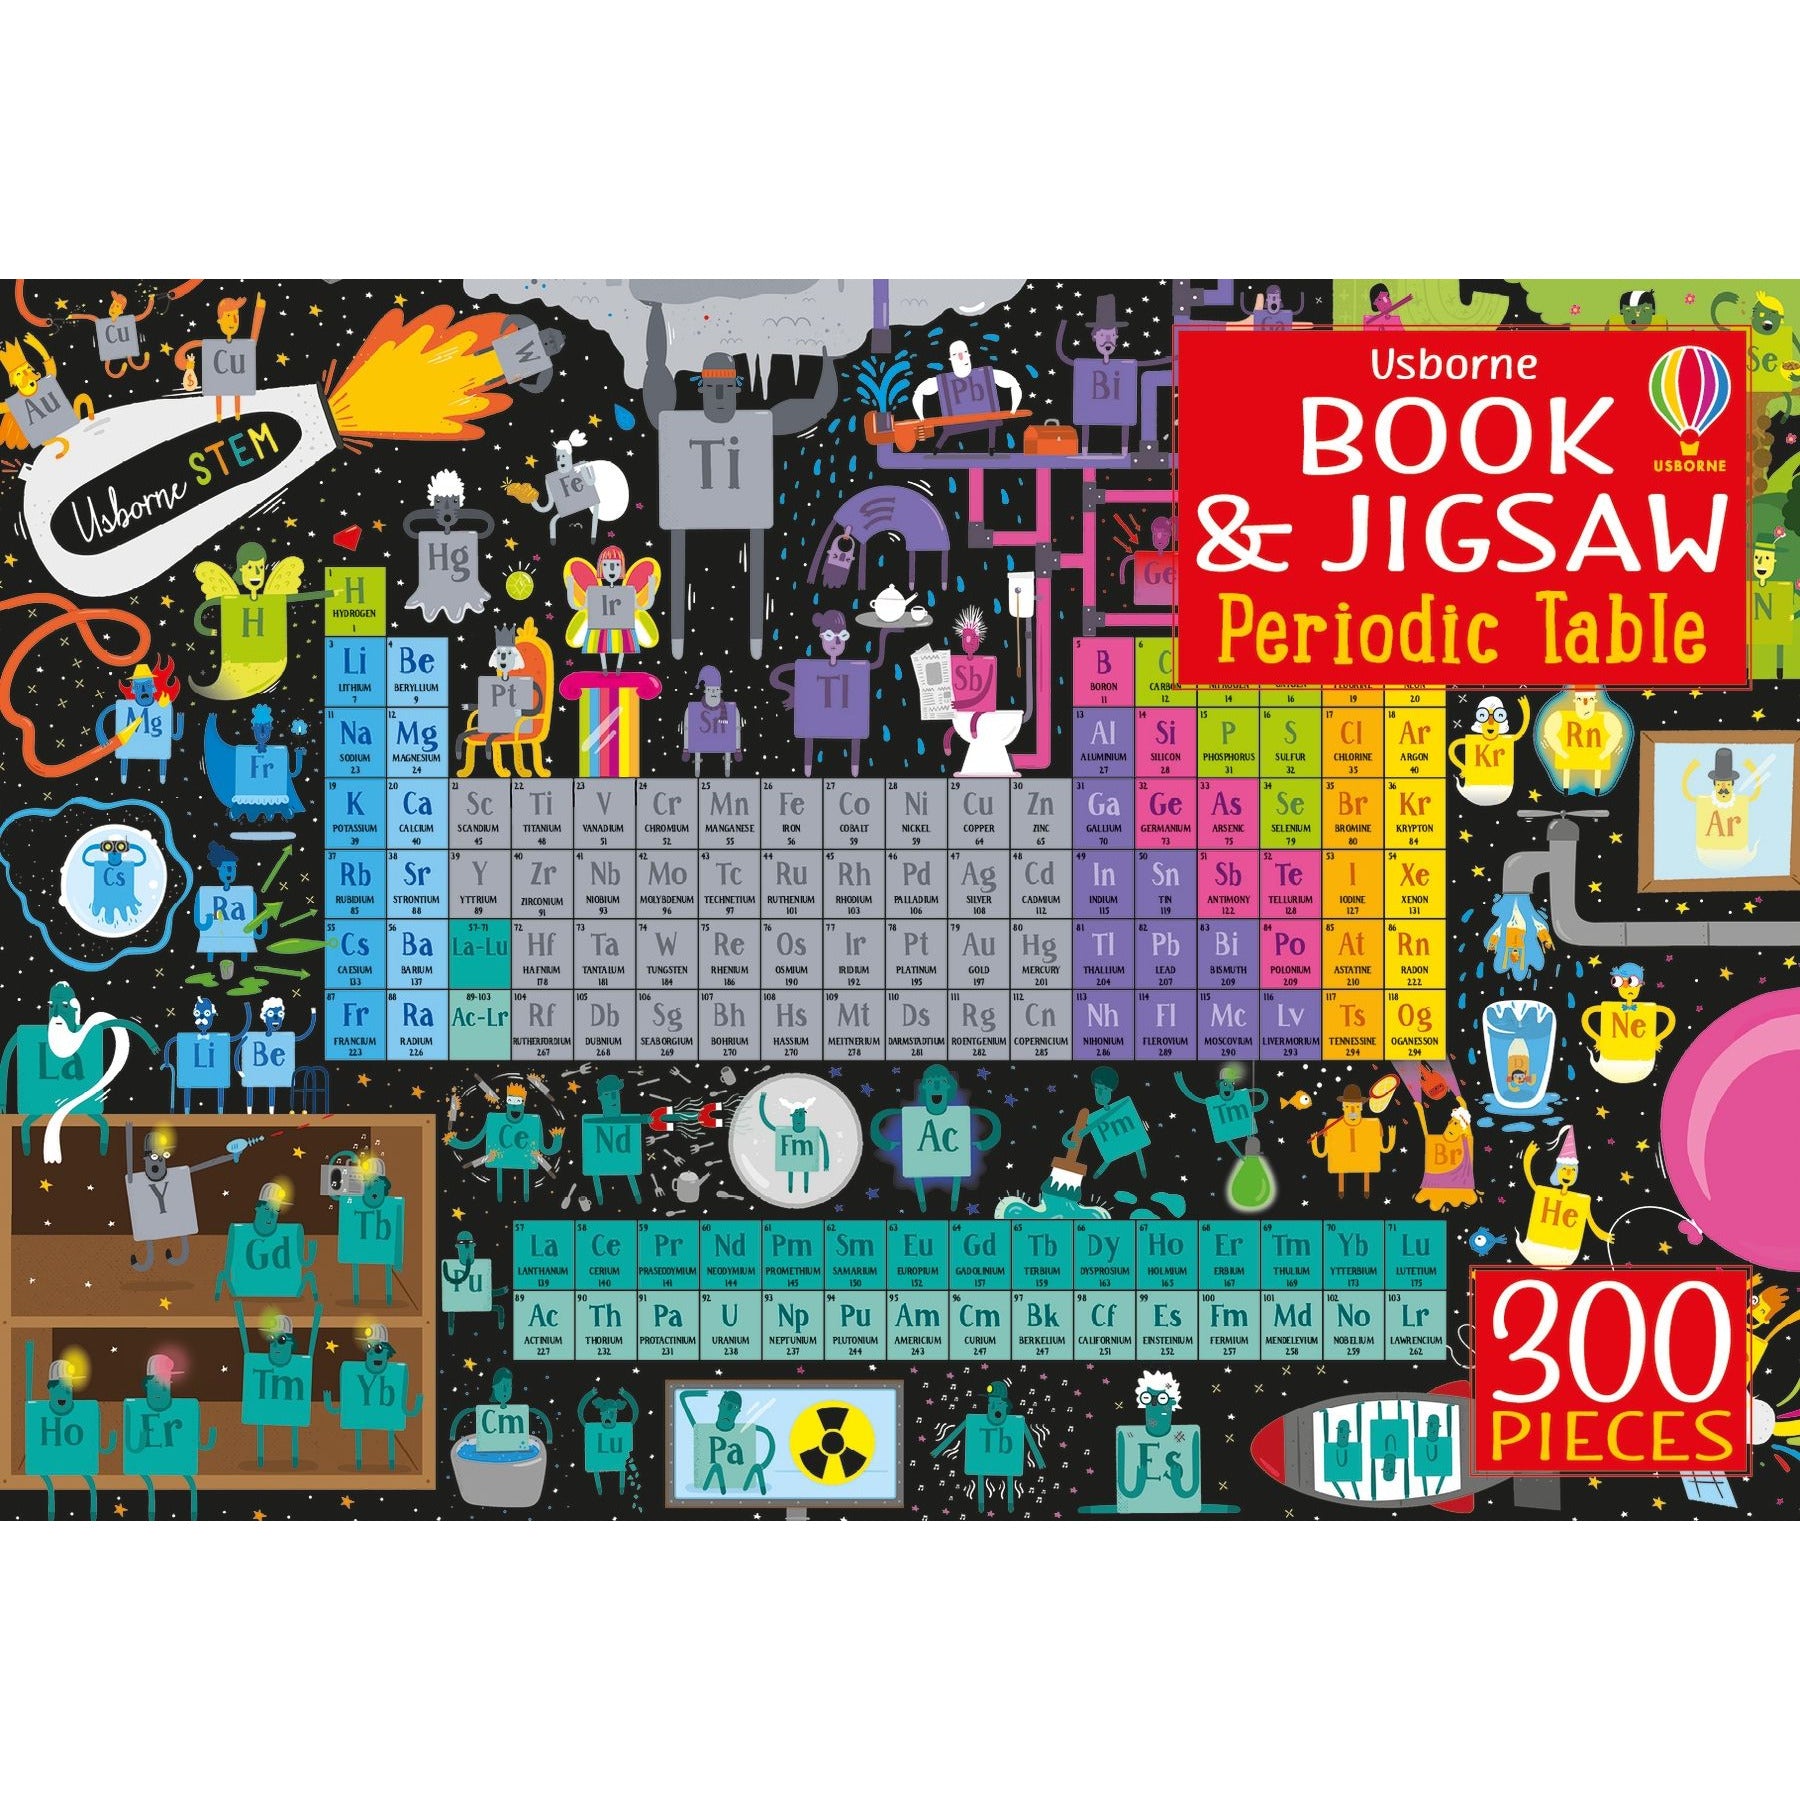 Periodic Table Book & 300 Piece Jigsaw Puzzle